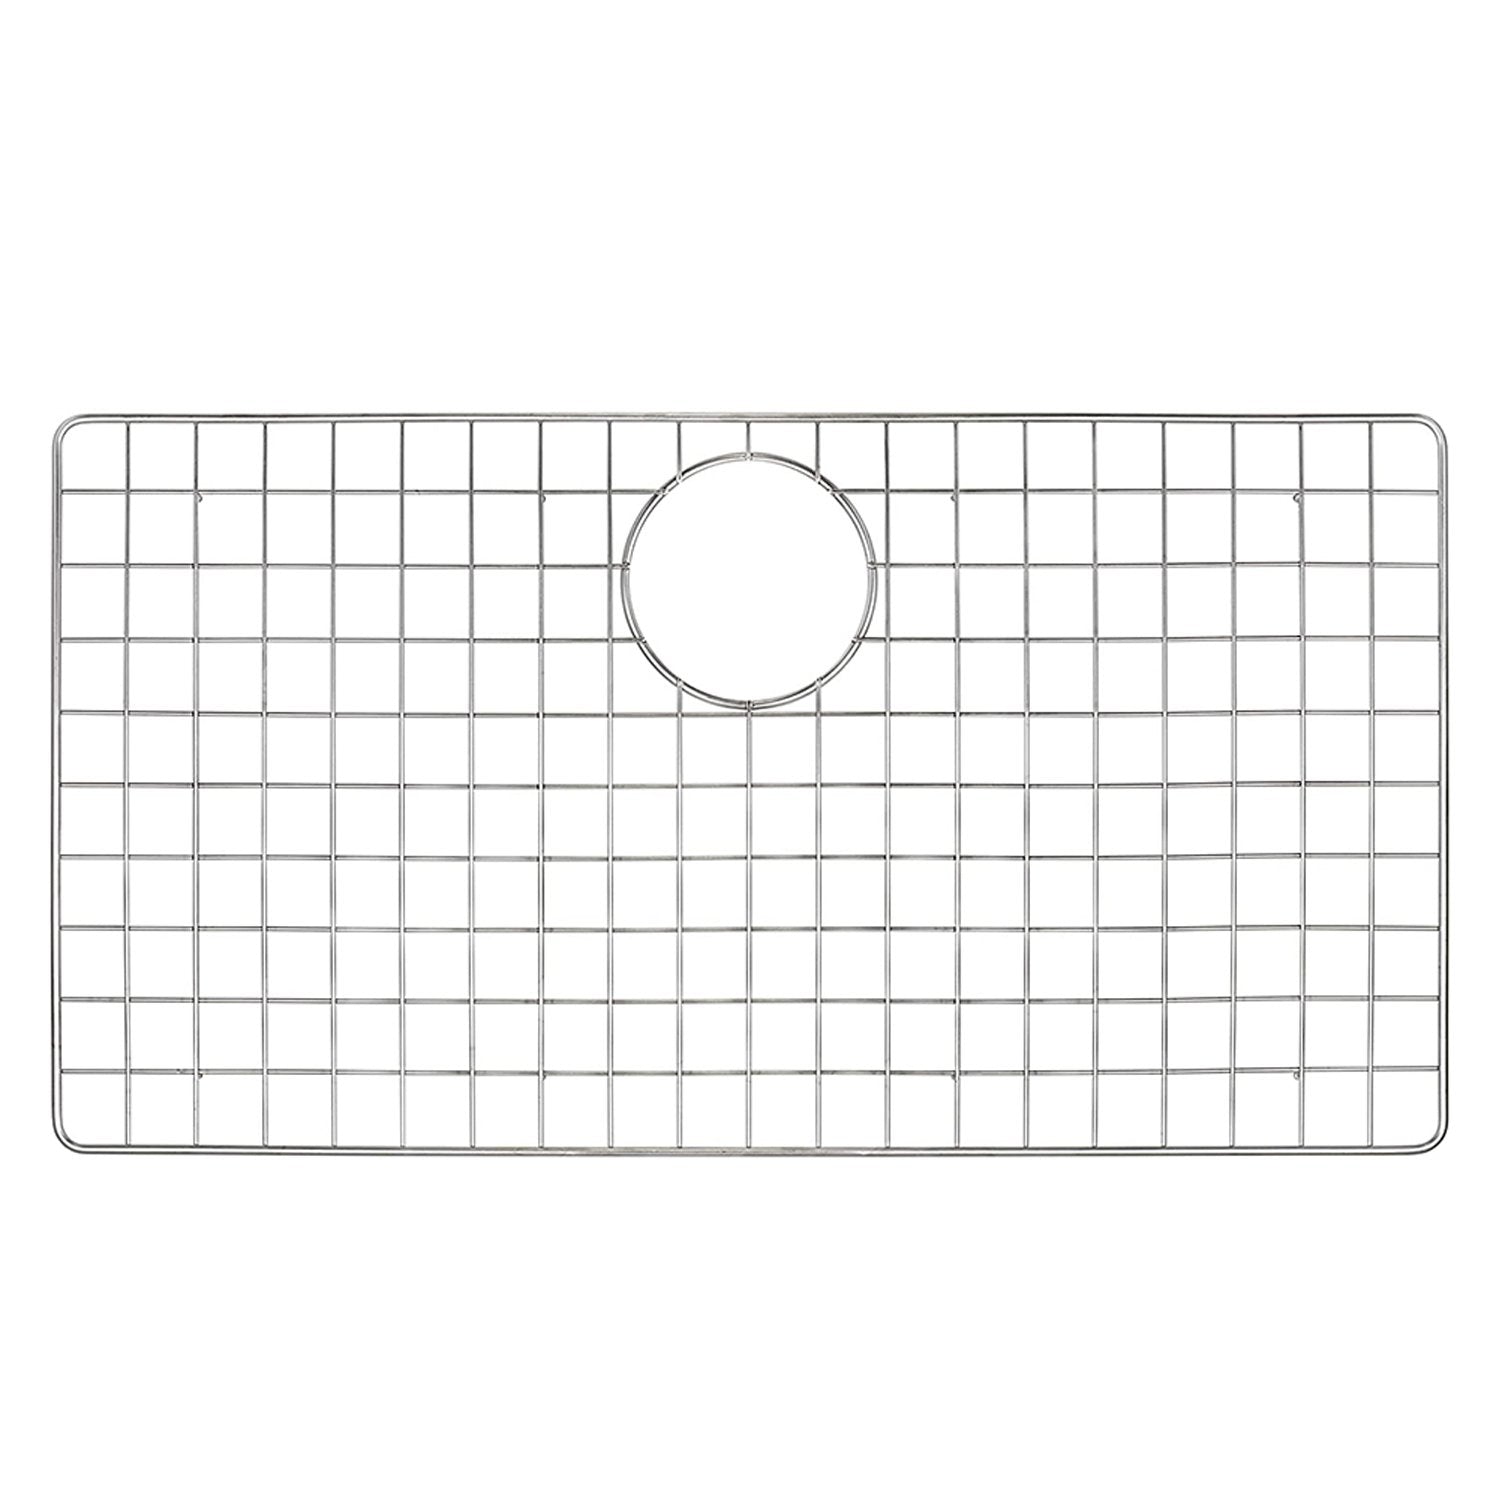 Ruvati 27" x 16" Stainless Steel Bottom Grid for RVG1080 and RVG2080 Kitchen Sinks  RVA61080